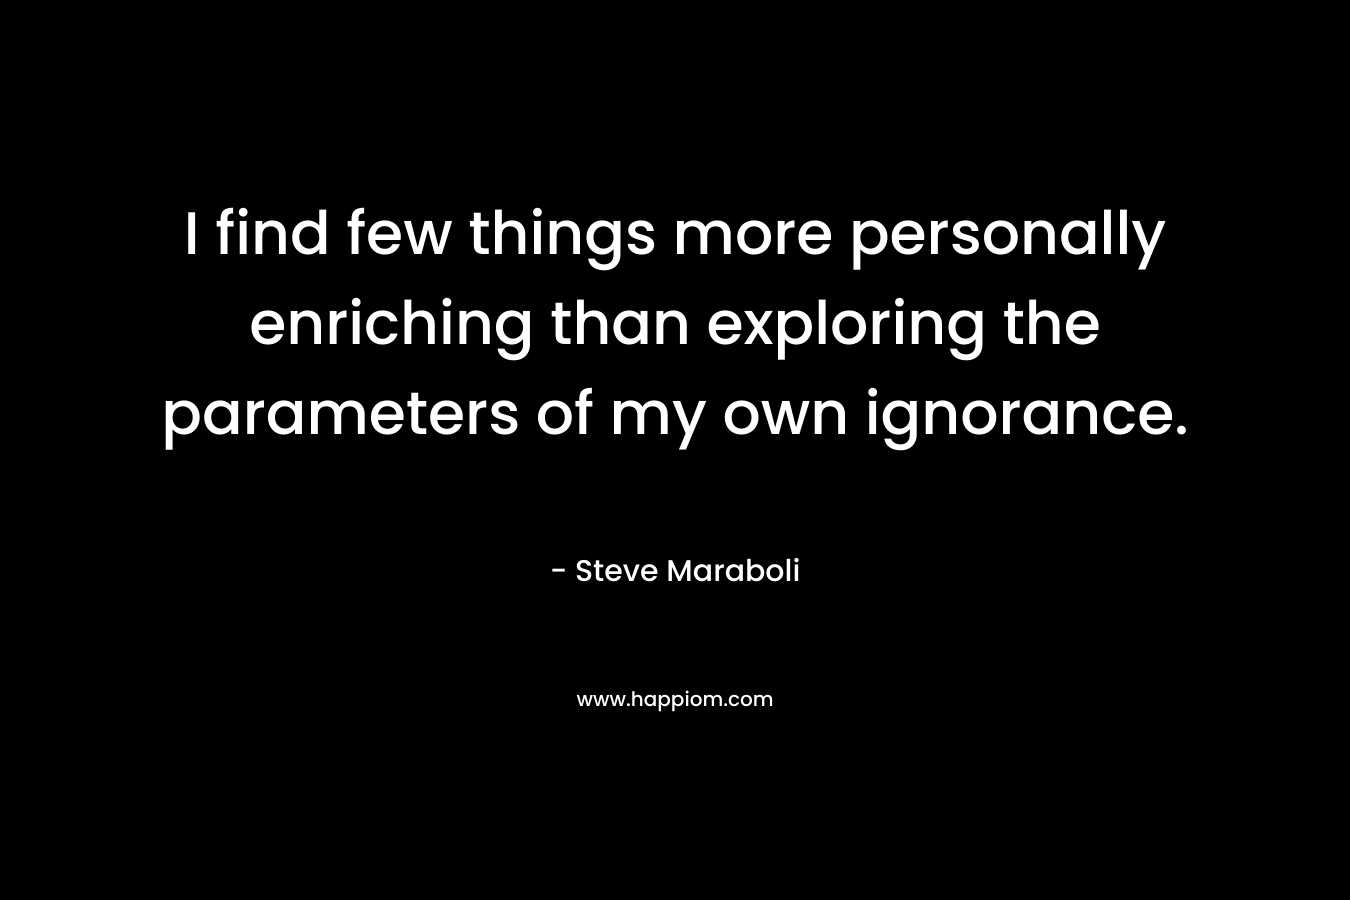 I find few things more personally enriching than exploring the parameters of my own ignorance. – Steve Maraboli